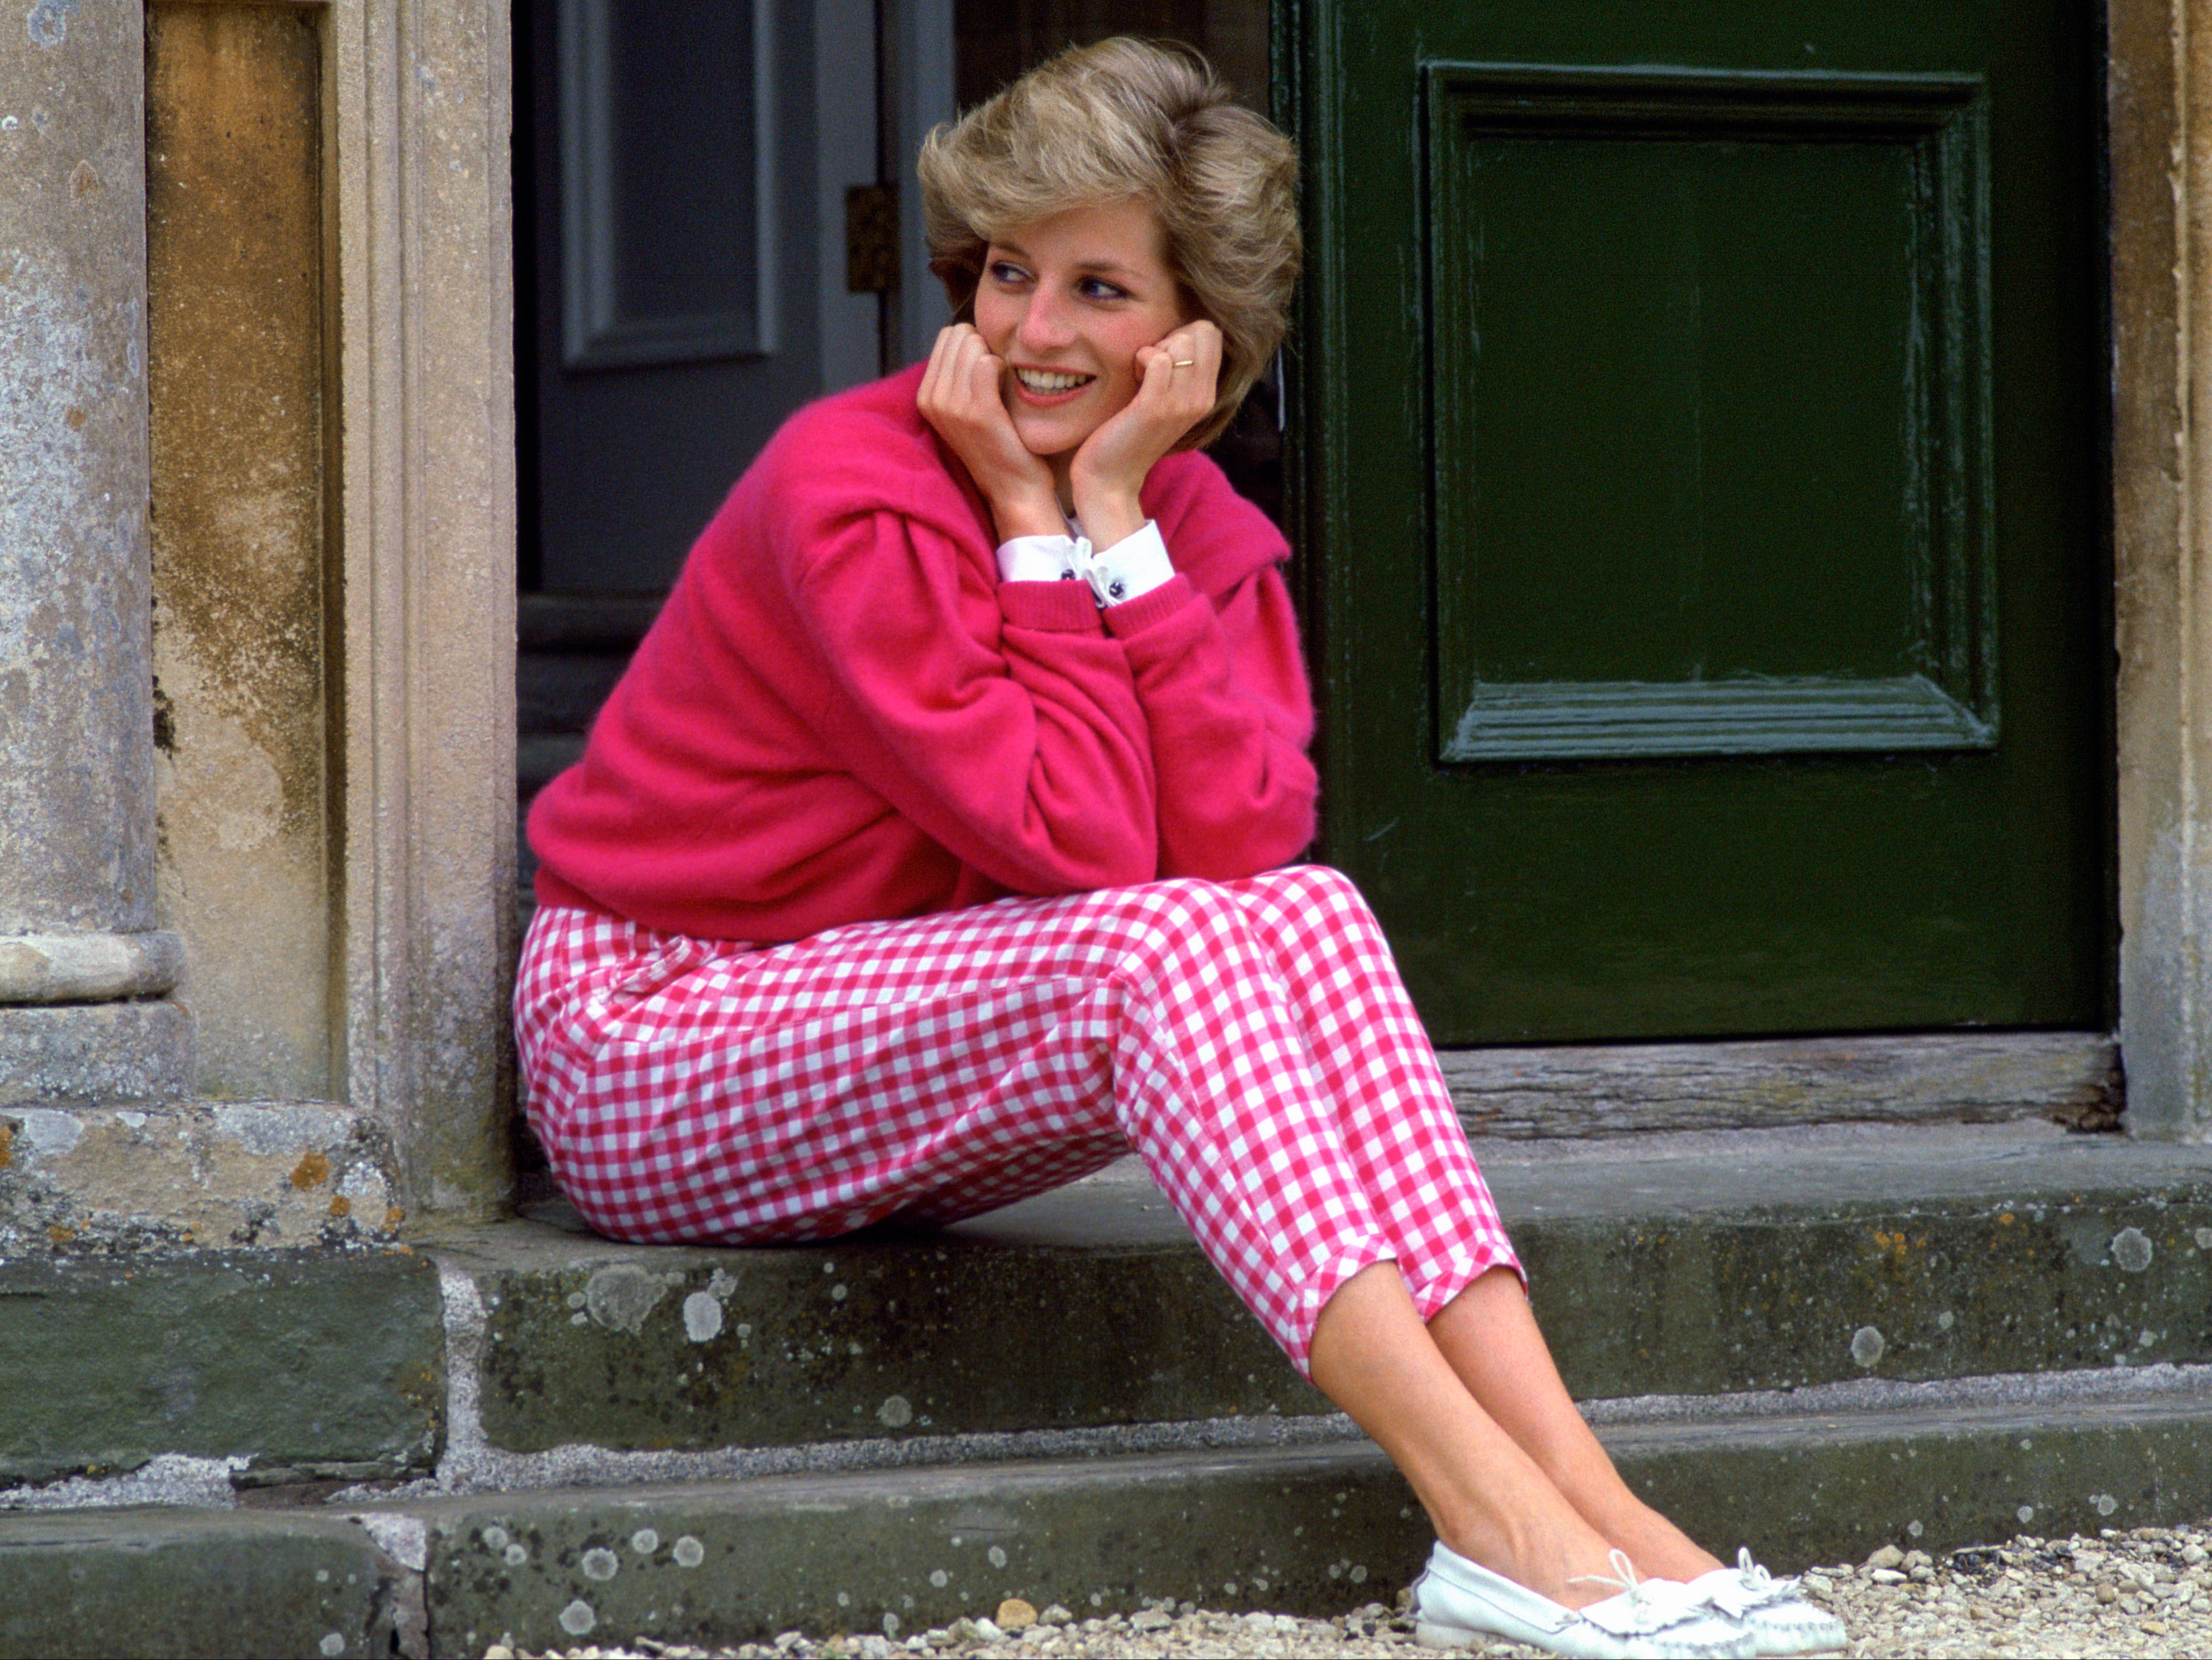 Princess Diana pictured outside her countryside home, Highgrove, in 1986. One of her most iconic looks, Diana chose a pair of high-waisted gingham pink trousers and an oversized fuchsia jumper with a white shirt underneath. The look was recreated in series four of The Crown .